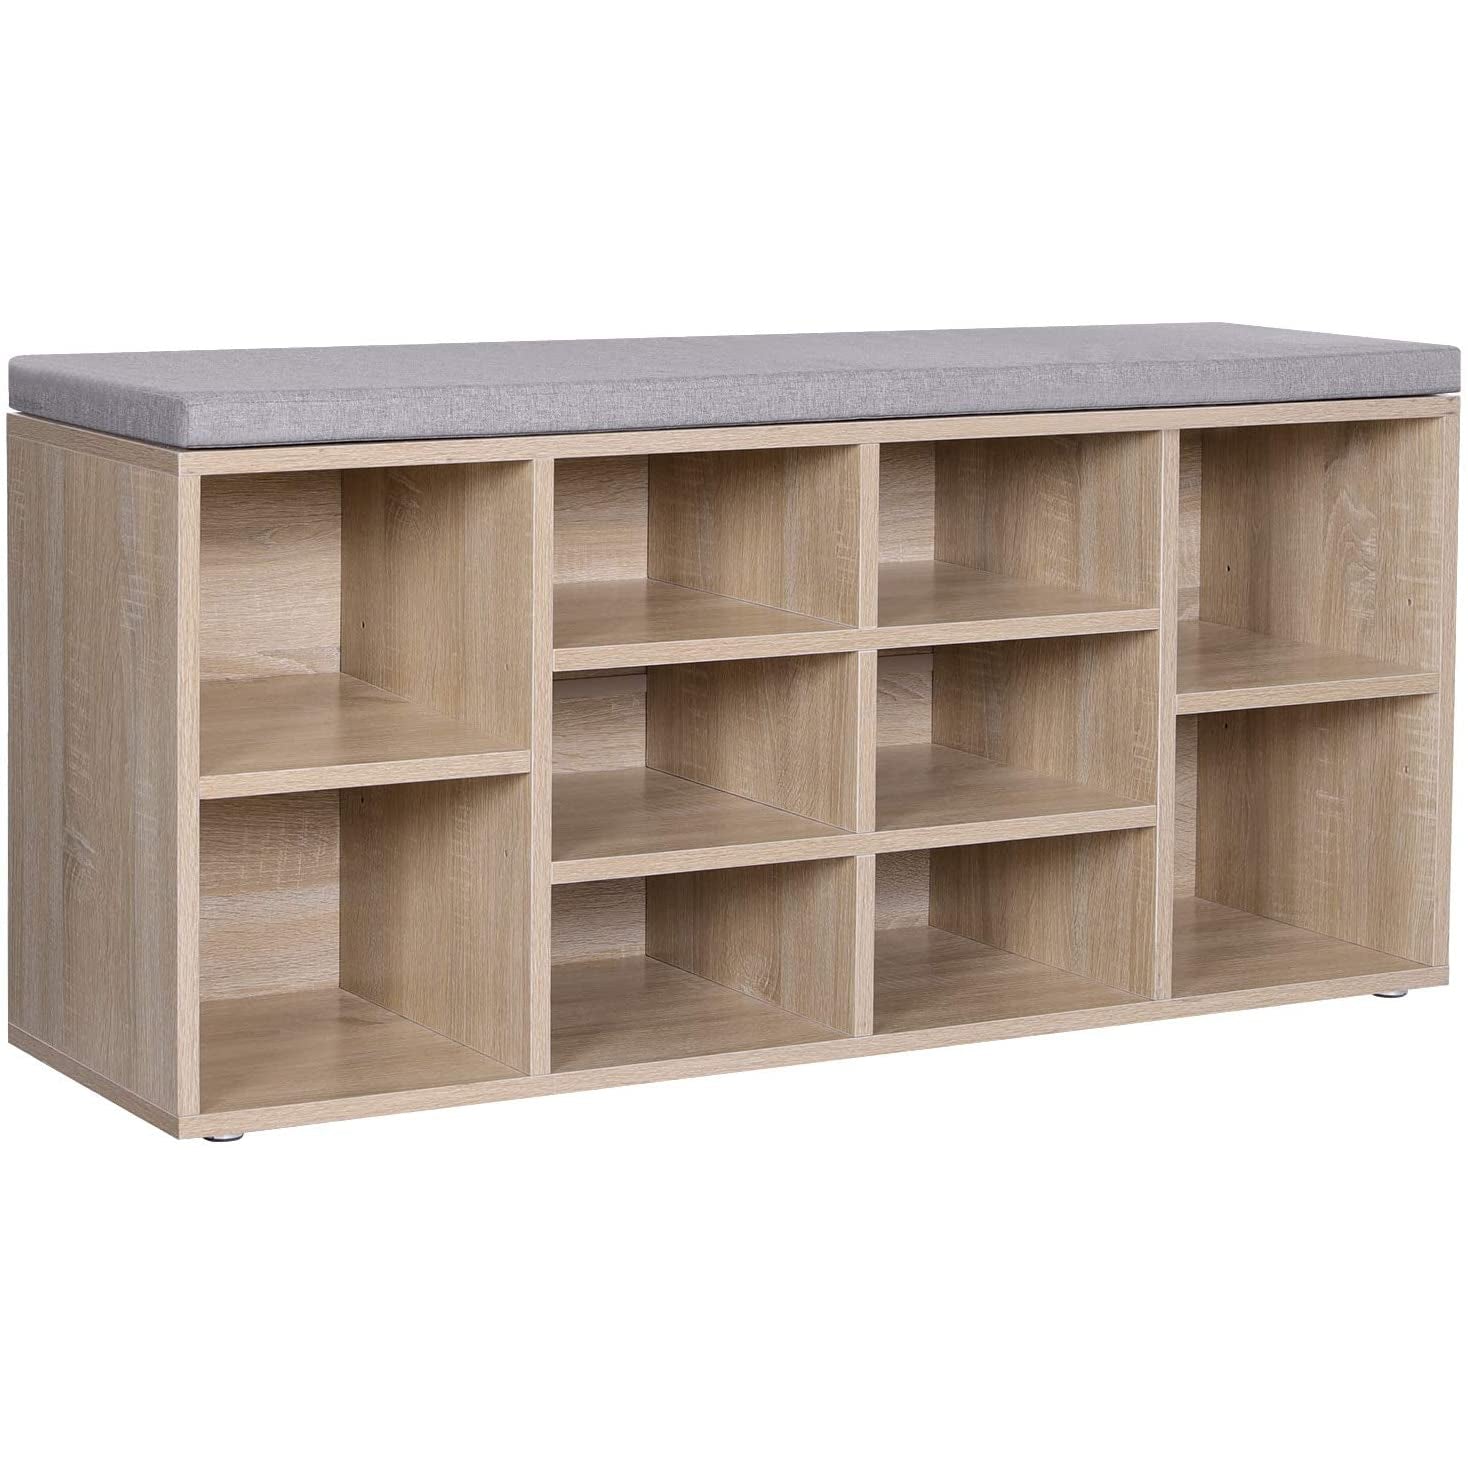 Nancy's Nowra Shoe Cabinet With Bench - Bench - 10 Pairs of Shoes - 104 x 48 x 30 cm